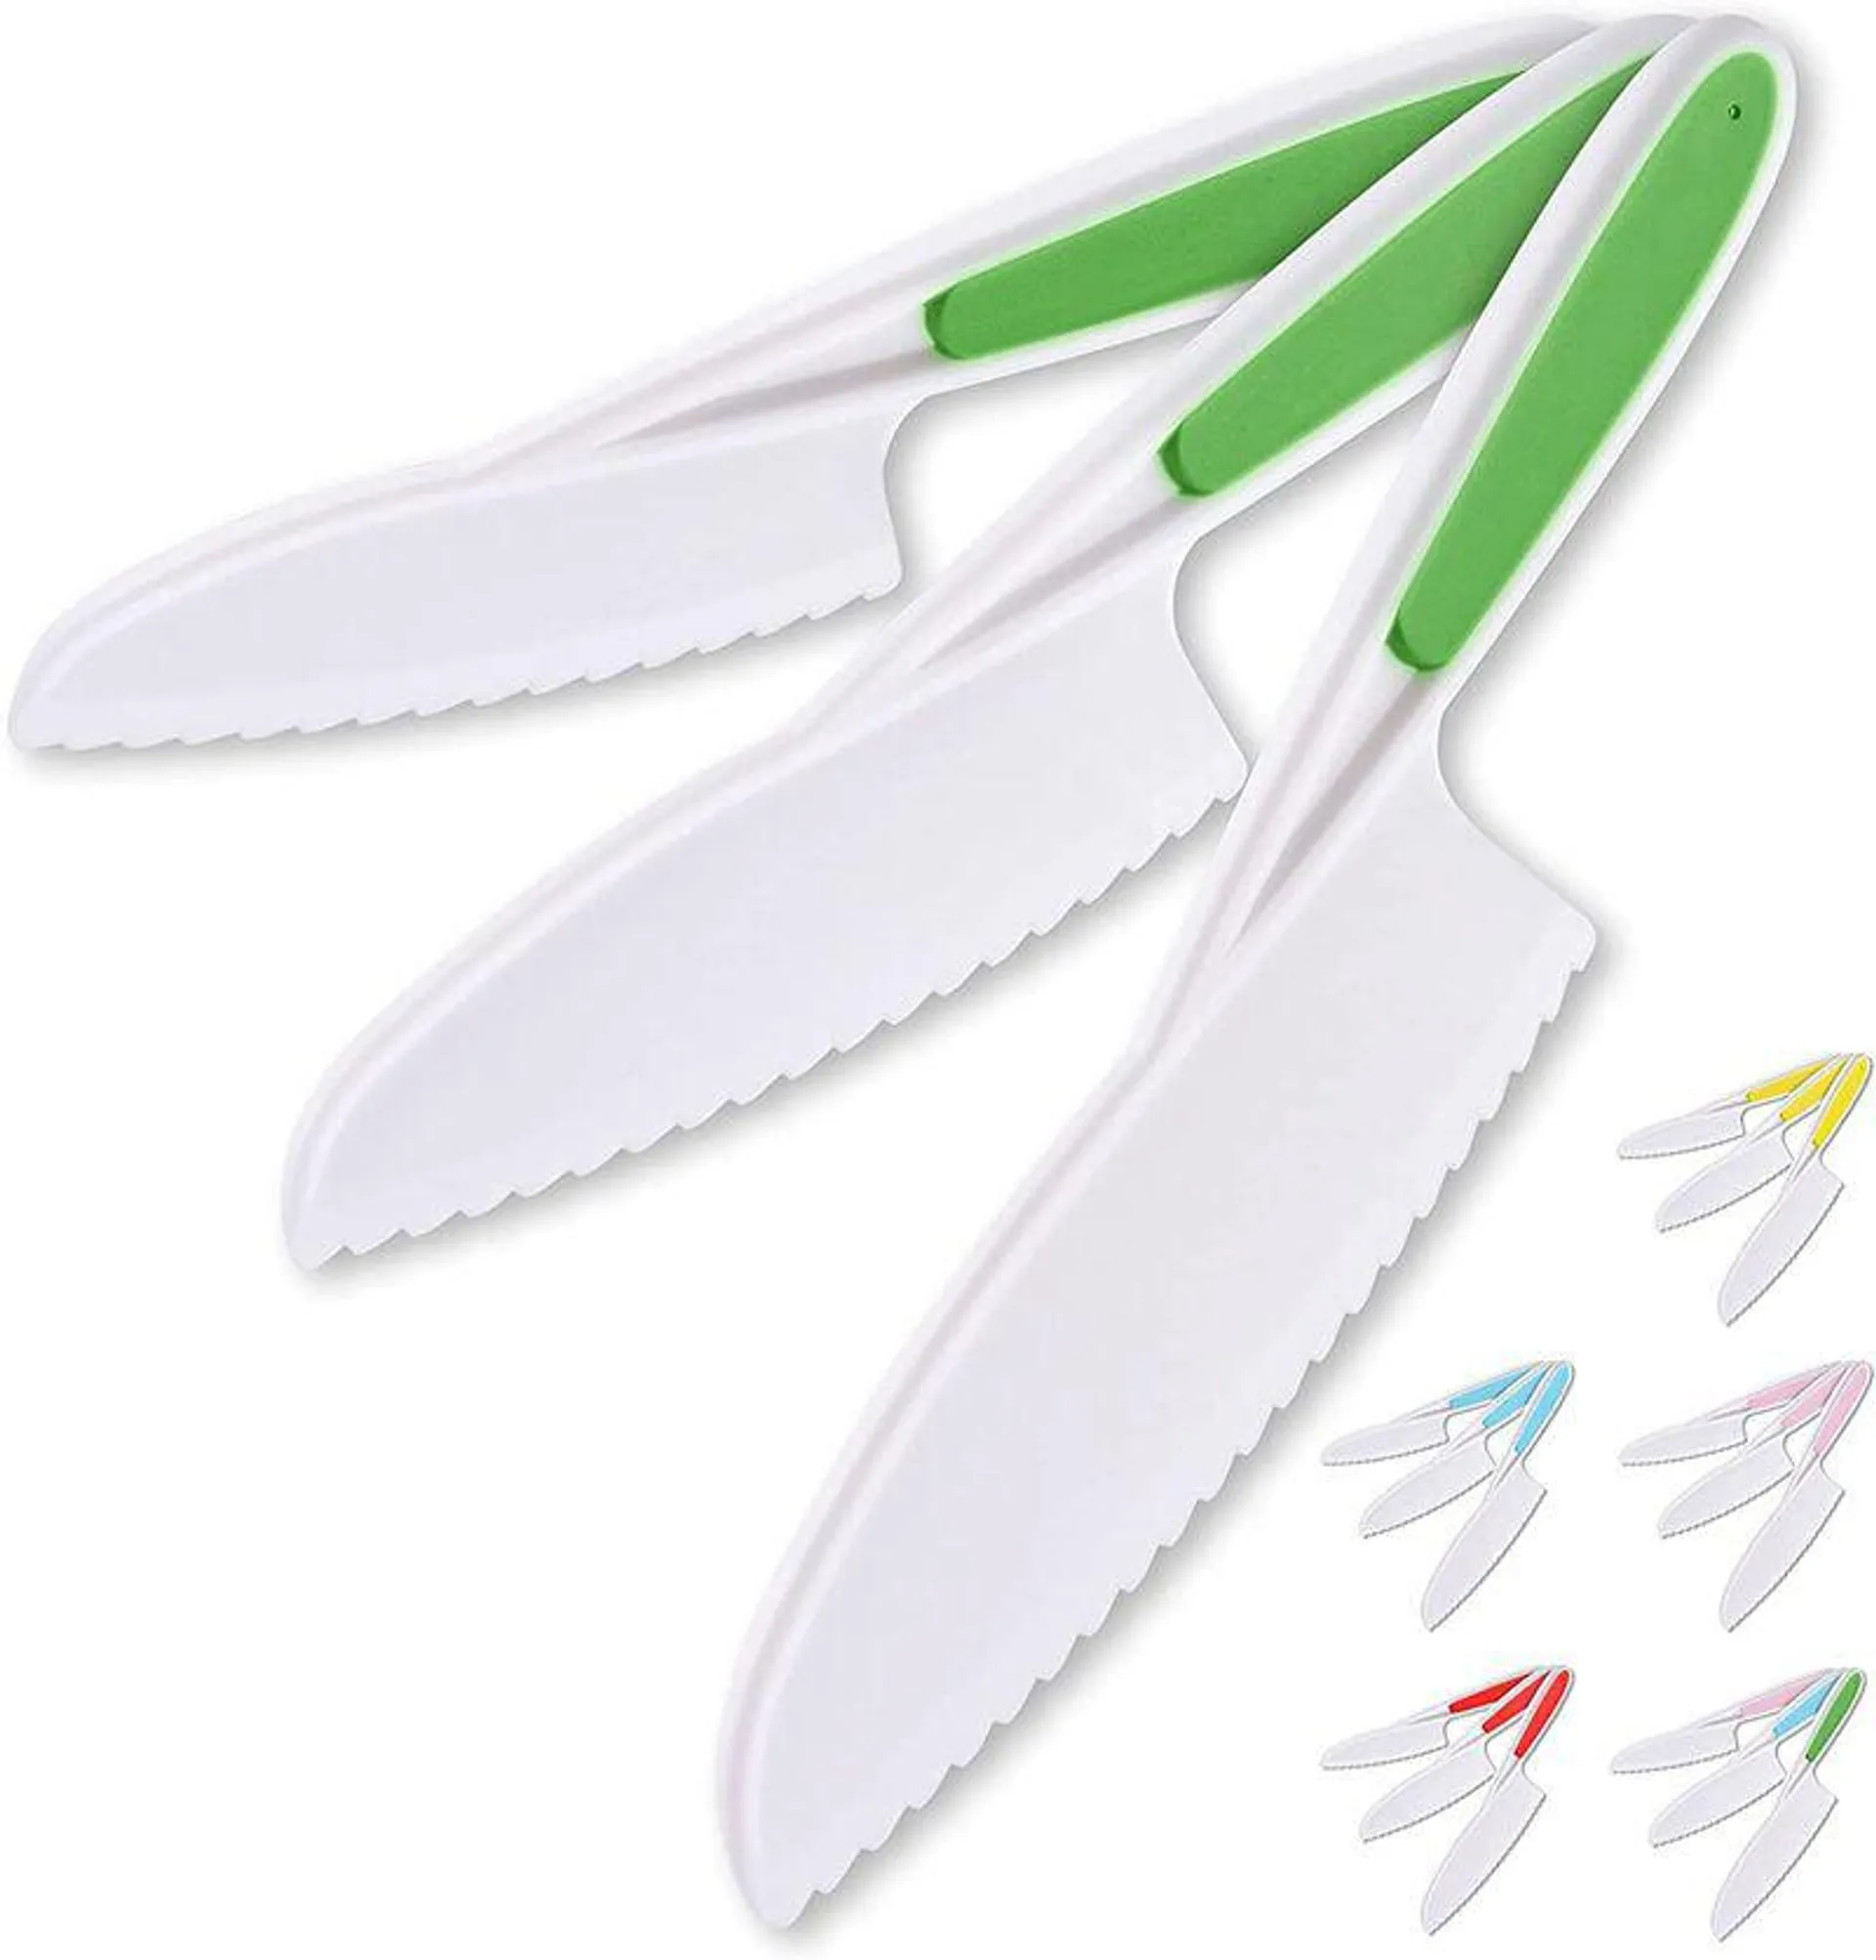 Knife Set for Children to Cook and Cut Fruits, Vegetables and Cakes